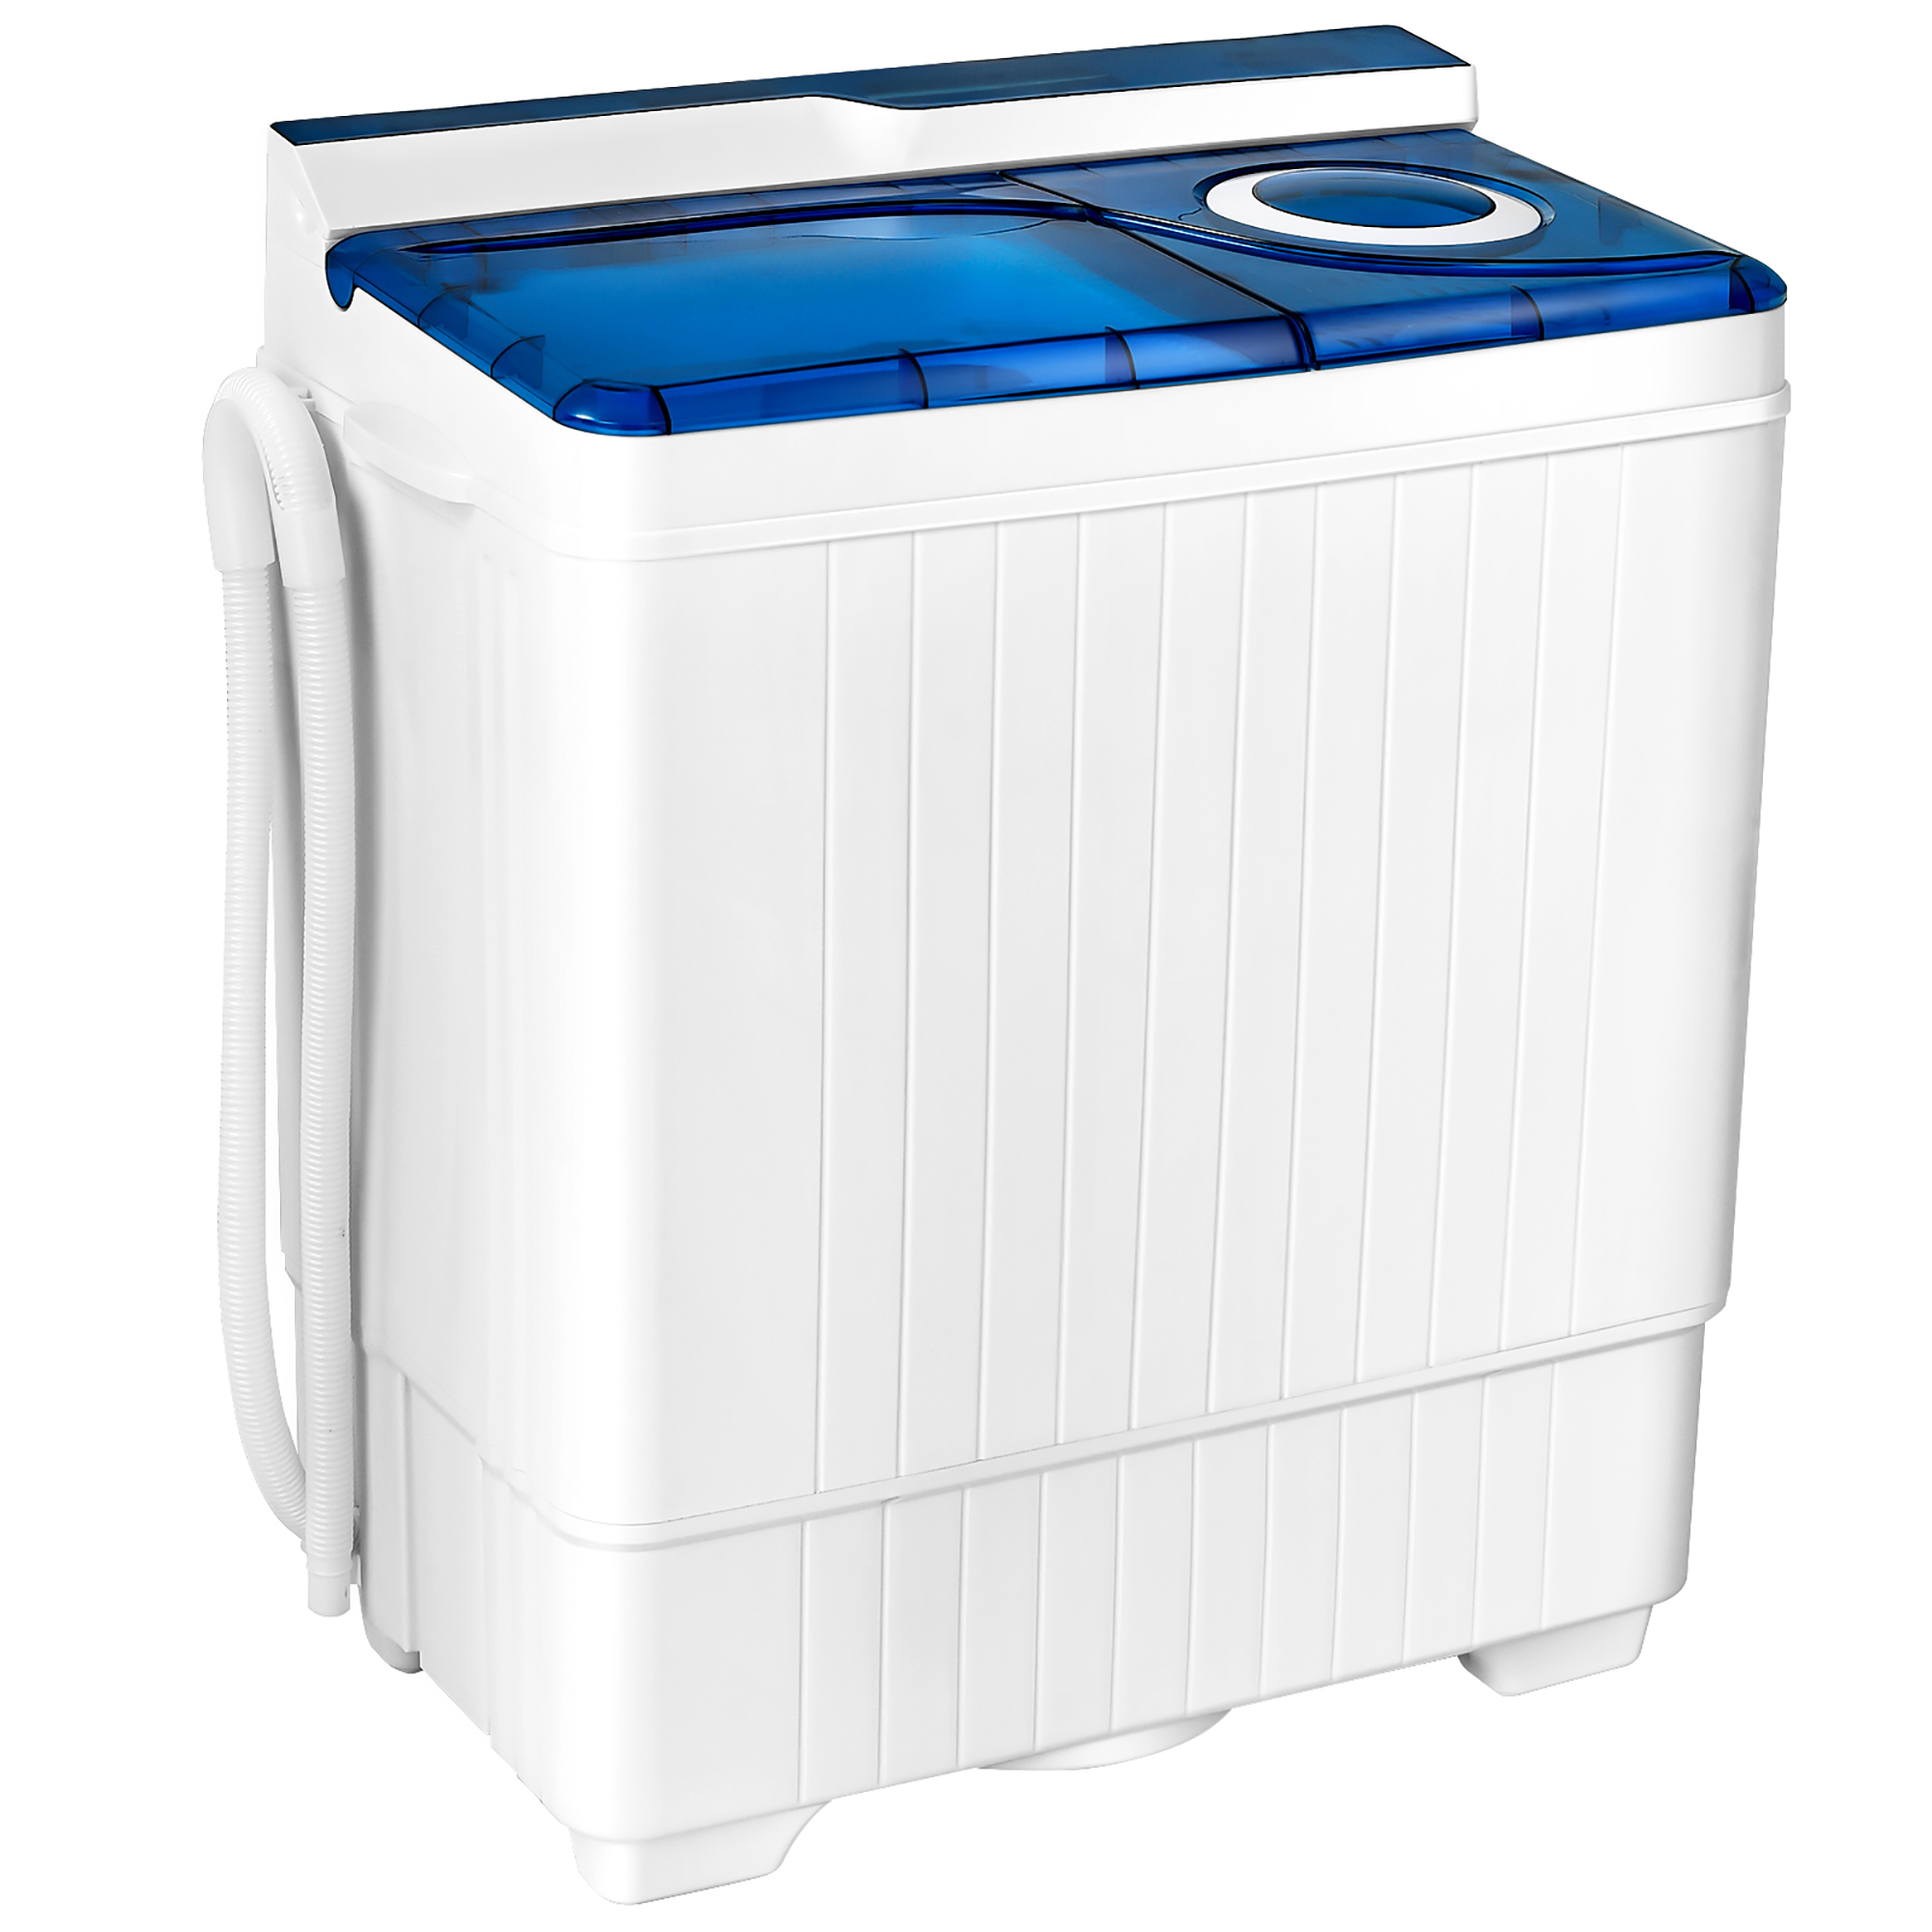 Costway 26lbs Portable Semi-automatic Washing Machine W/Built-in Drain Pump Blue - image 1 of 10